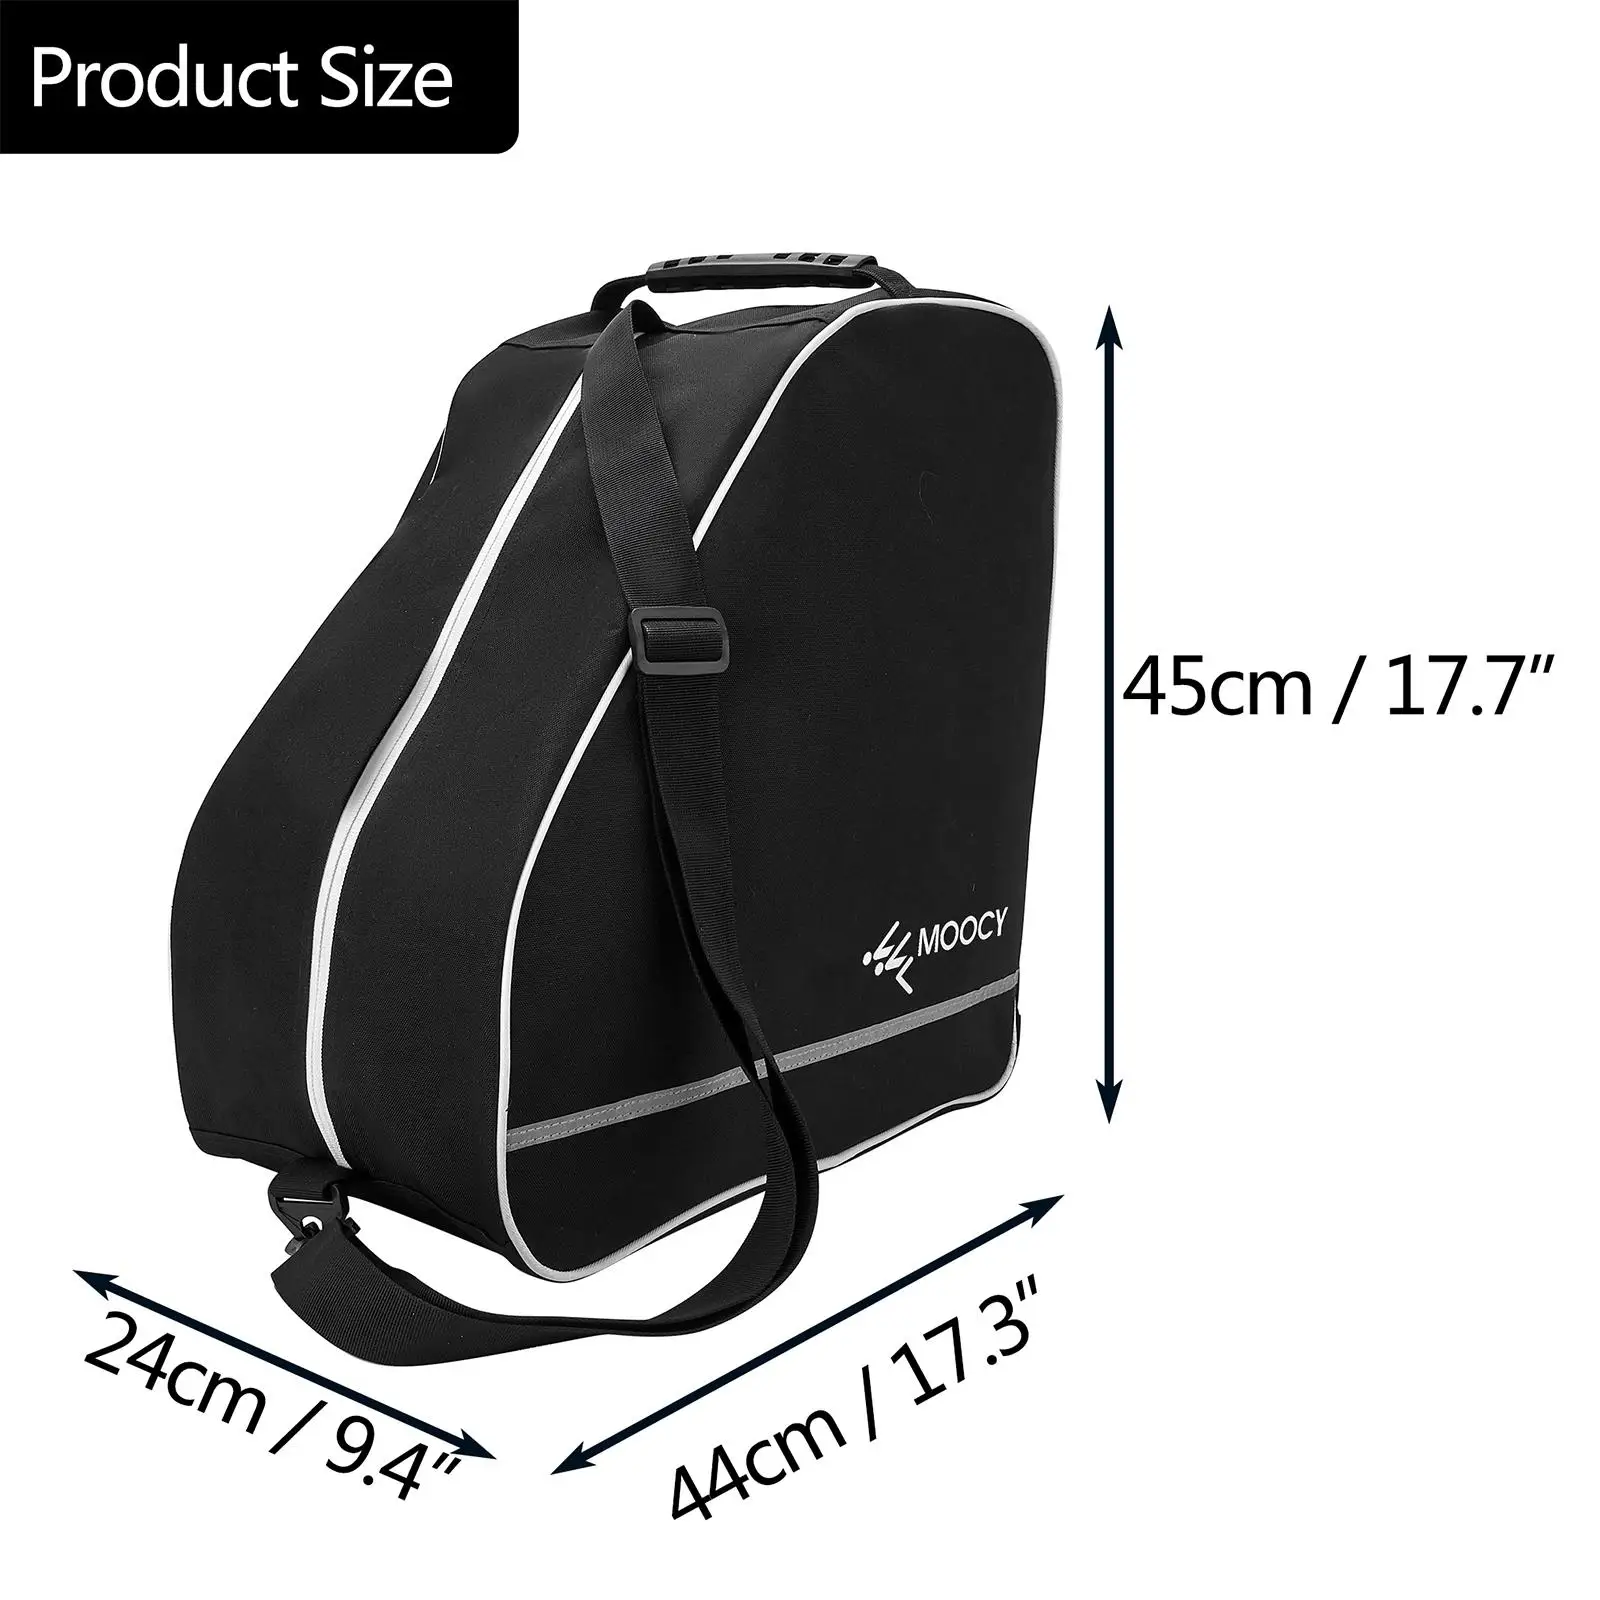 Skiing Boot Bag Traveling Easy to Carry Storage Large Capacity Backpack Waterproof for Riding Luggage Outdoor Women